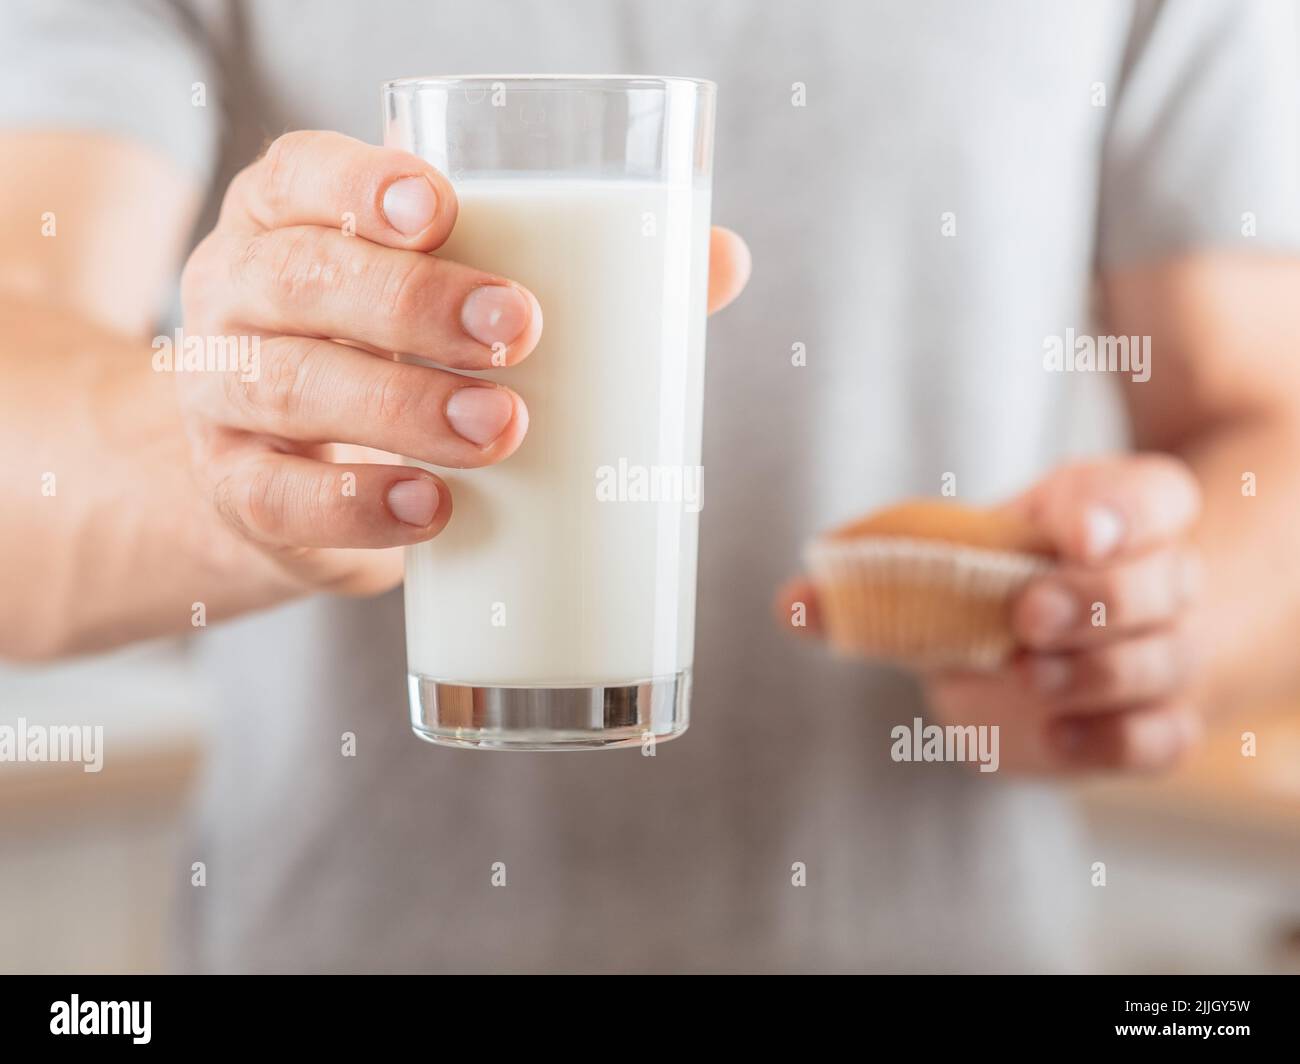 healthy diet energetic nutrition soy milk muffin Stock Photo